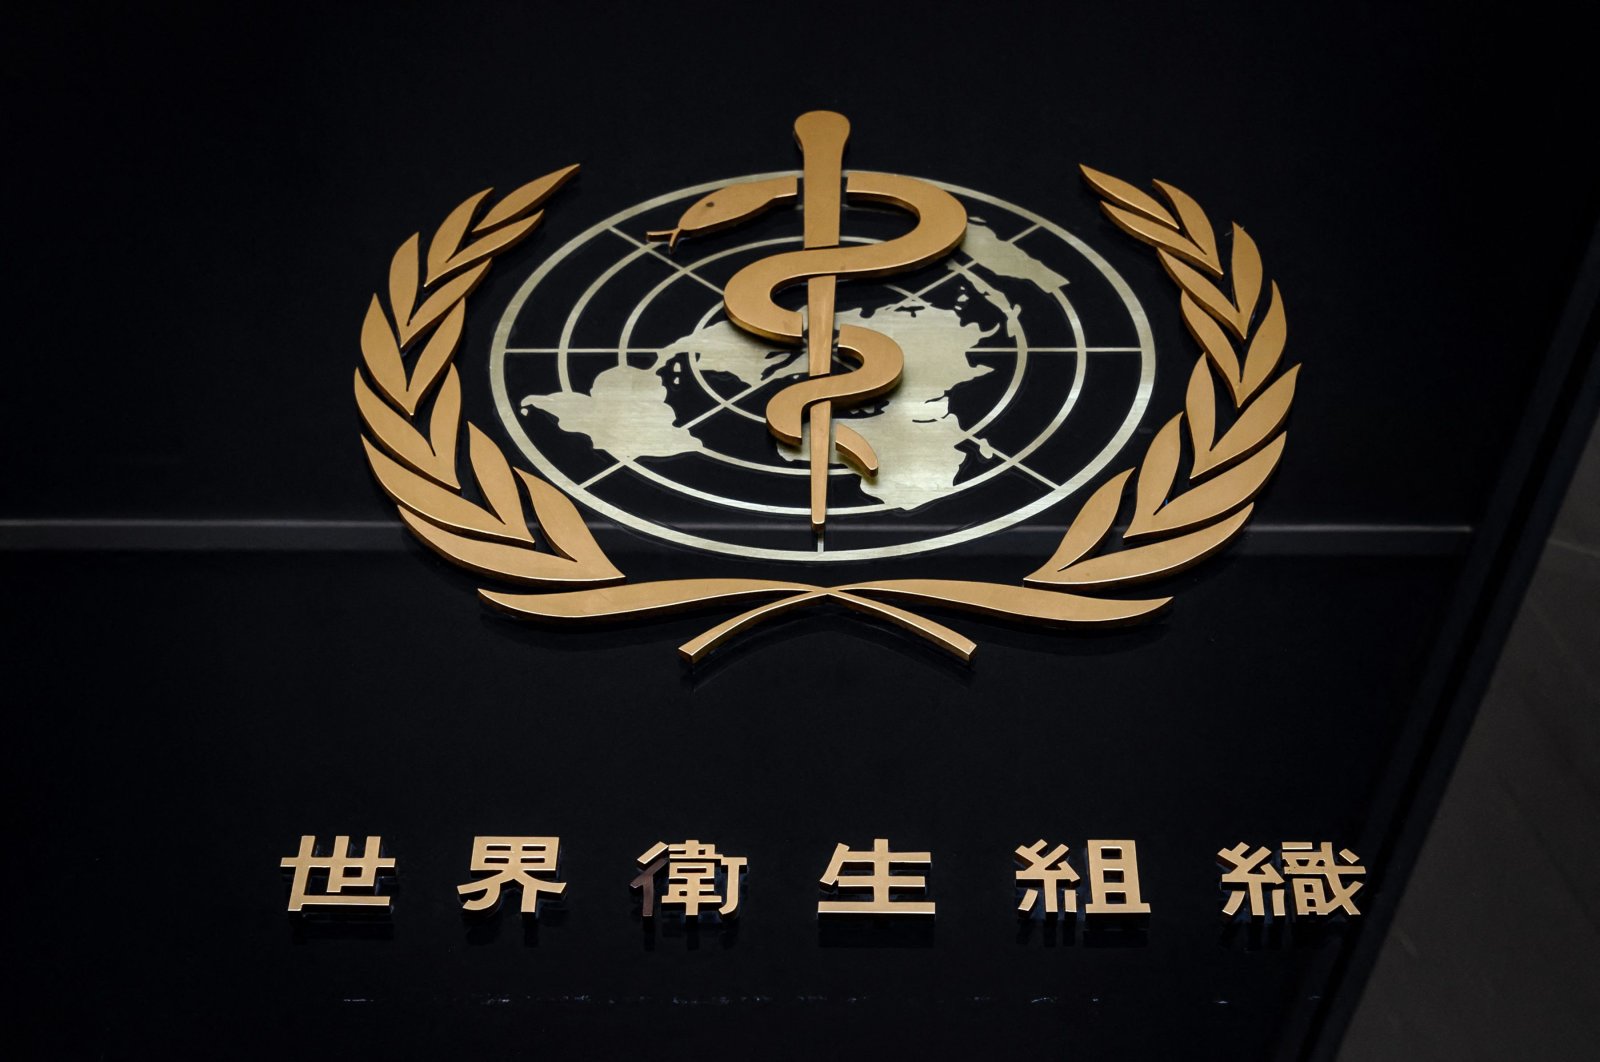 The logo of the World Health Organization (WHO) written in Chinese stands at the entrance of their headquarters in Geneva, Switzerland, Feb. 24, 2020. (AFP Photo)